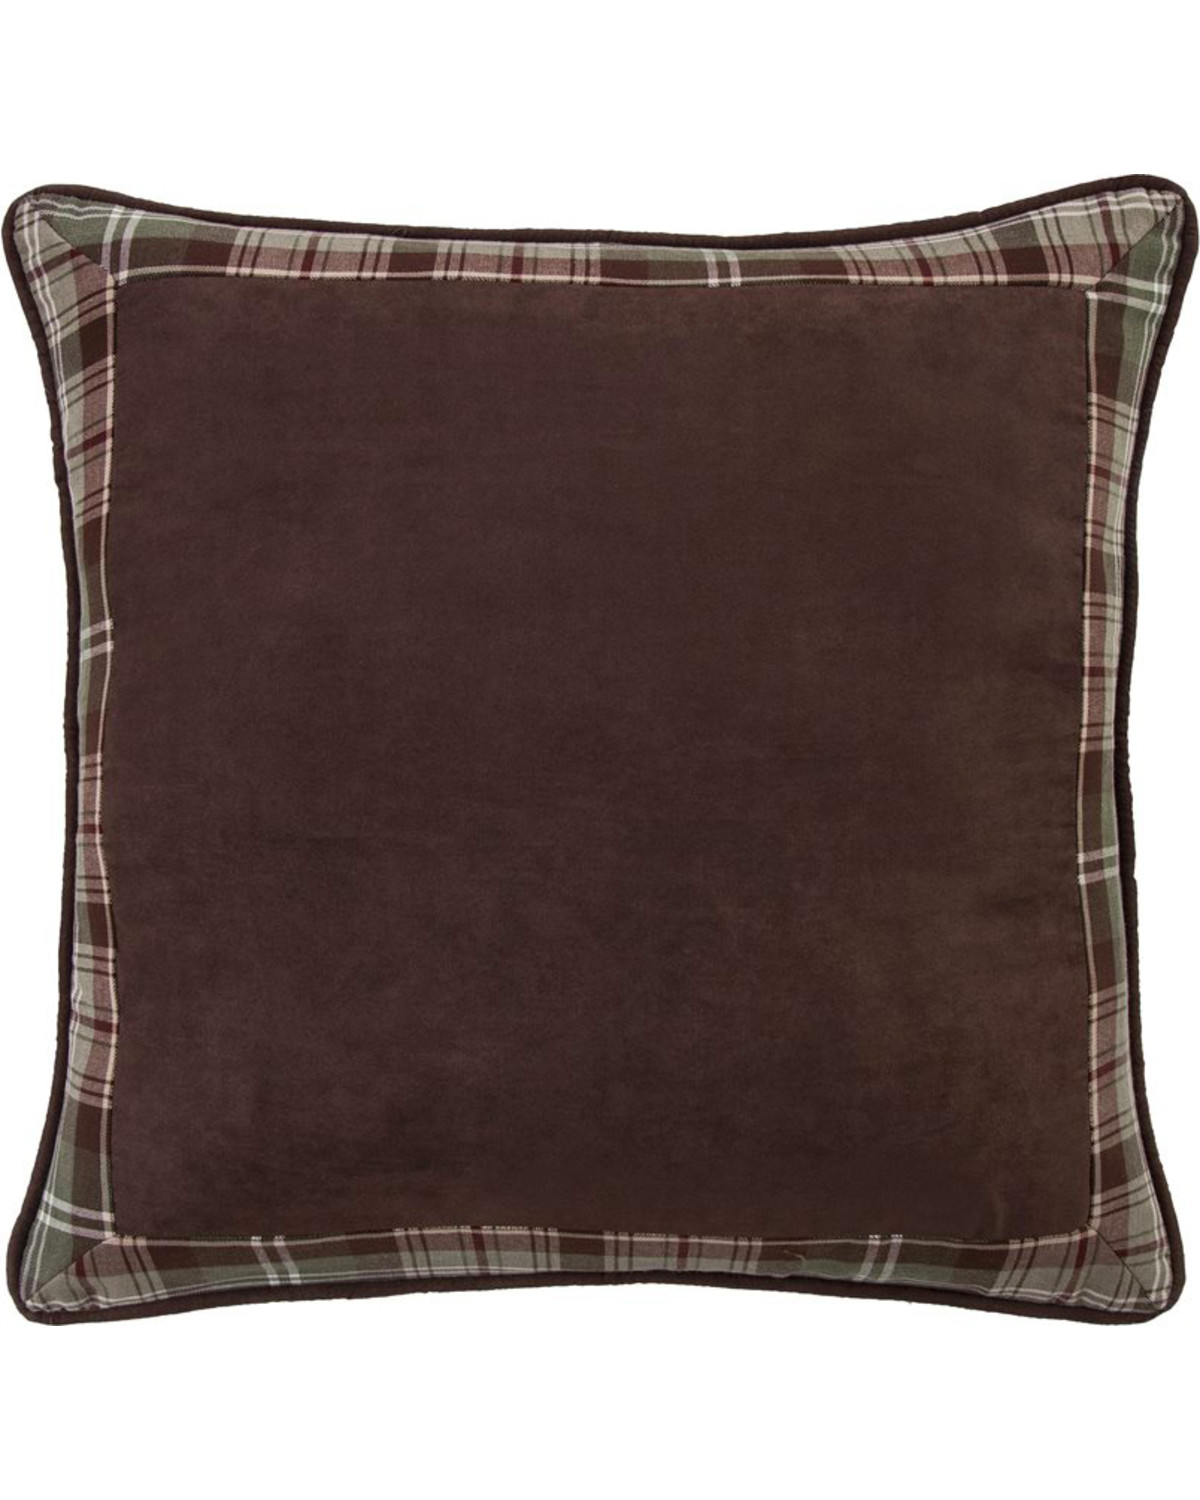 HiEnd Accents Huntsman Buffalo Check Reversed To Plaid Framed Euro Sham